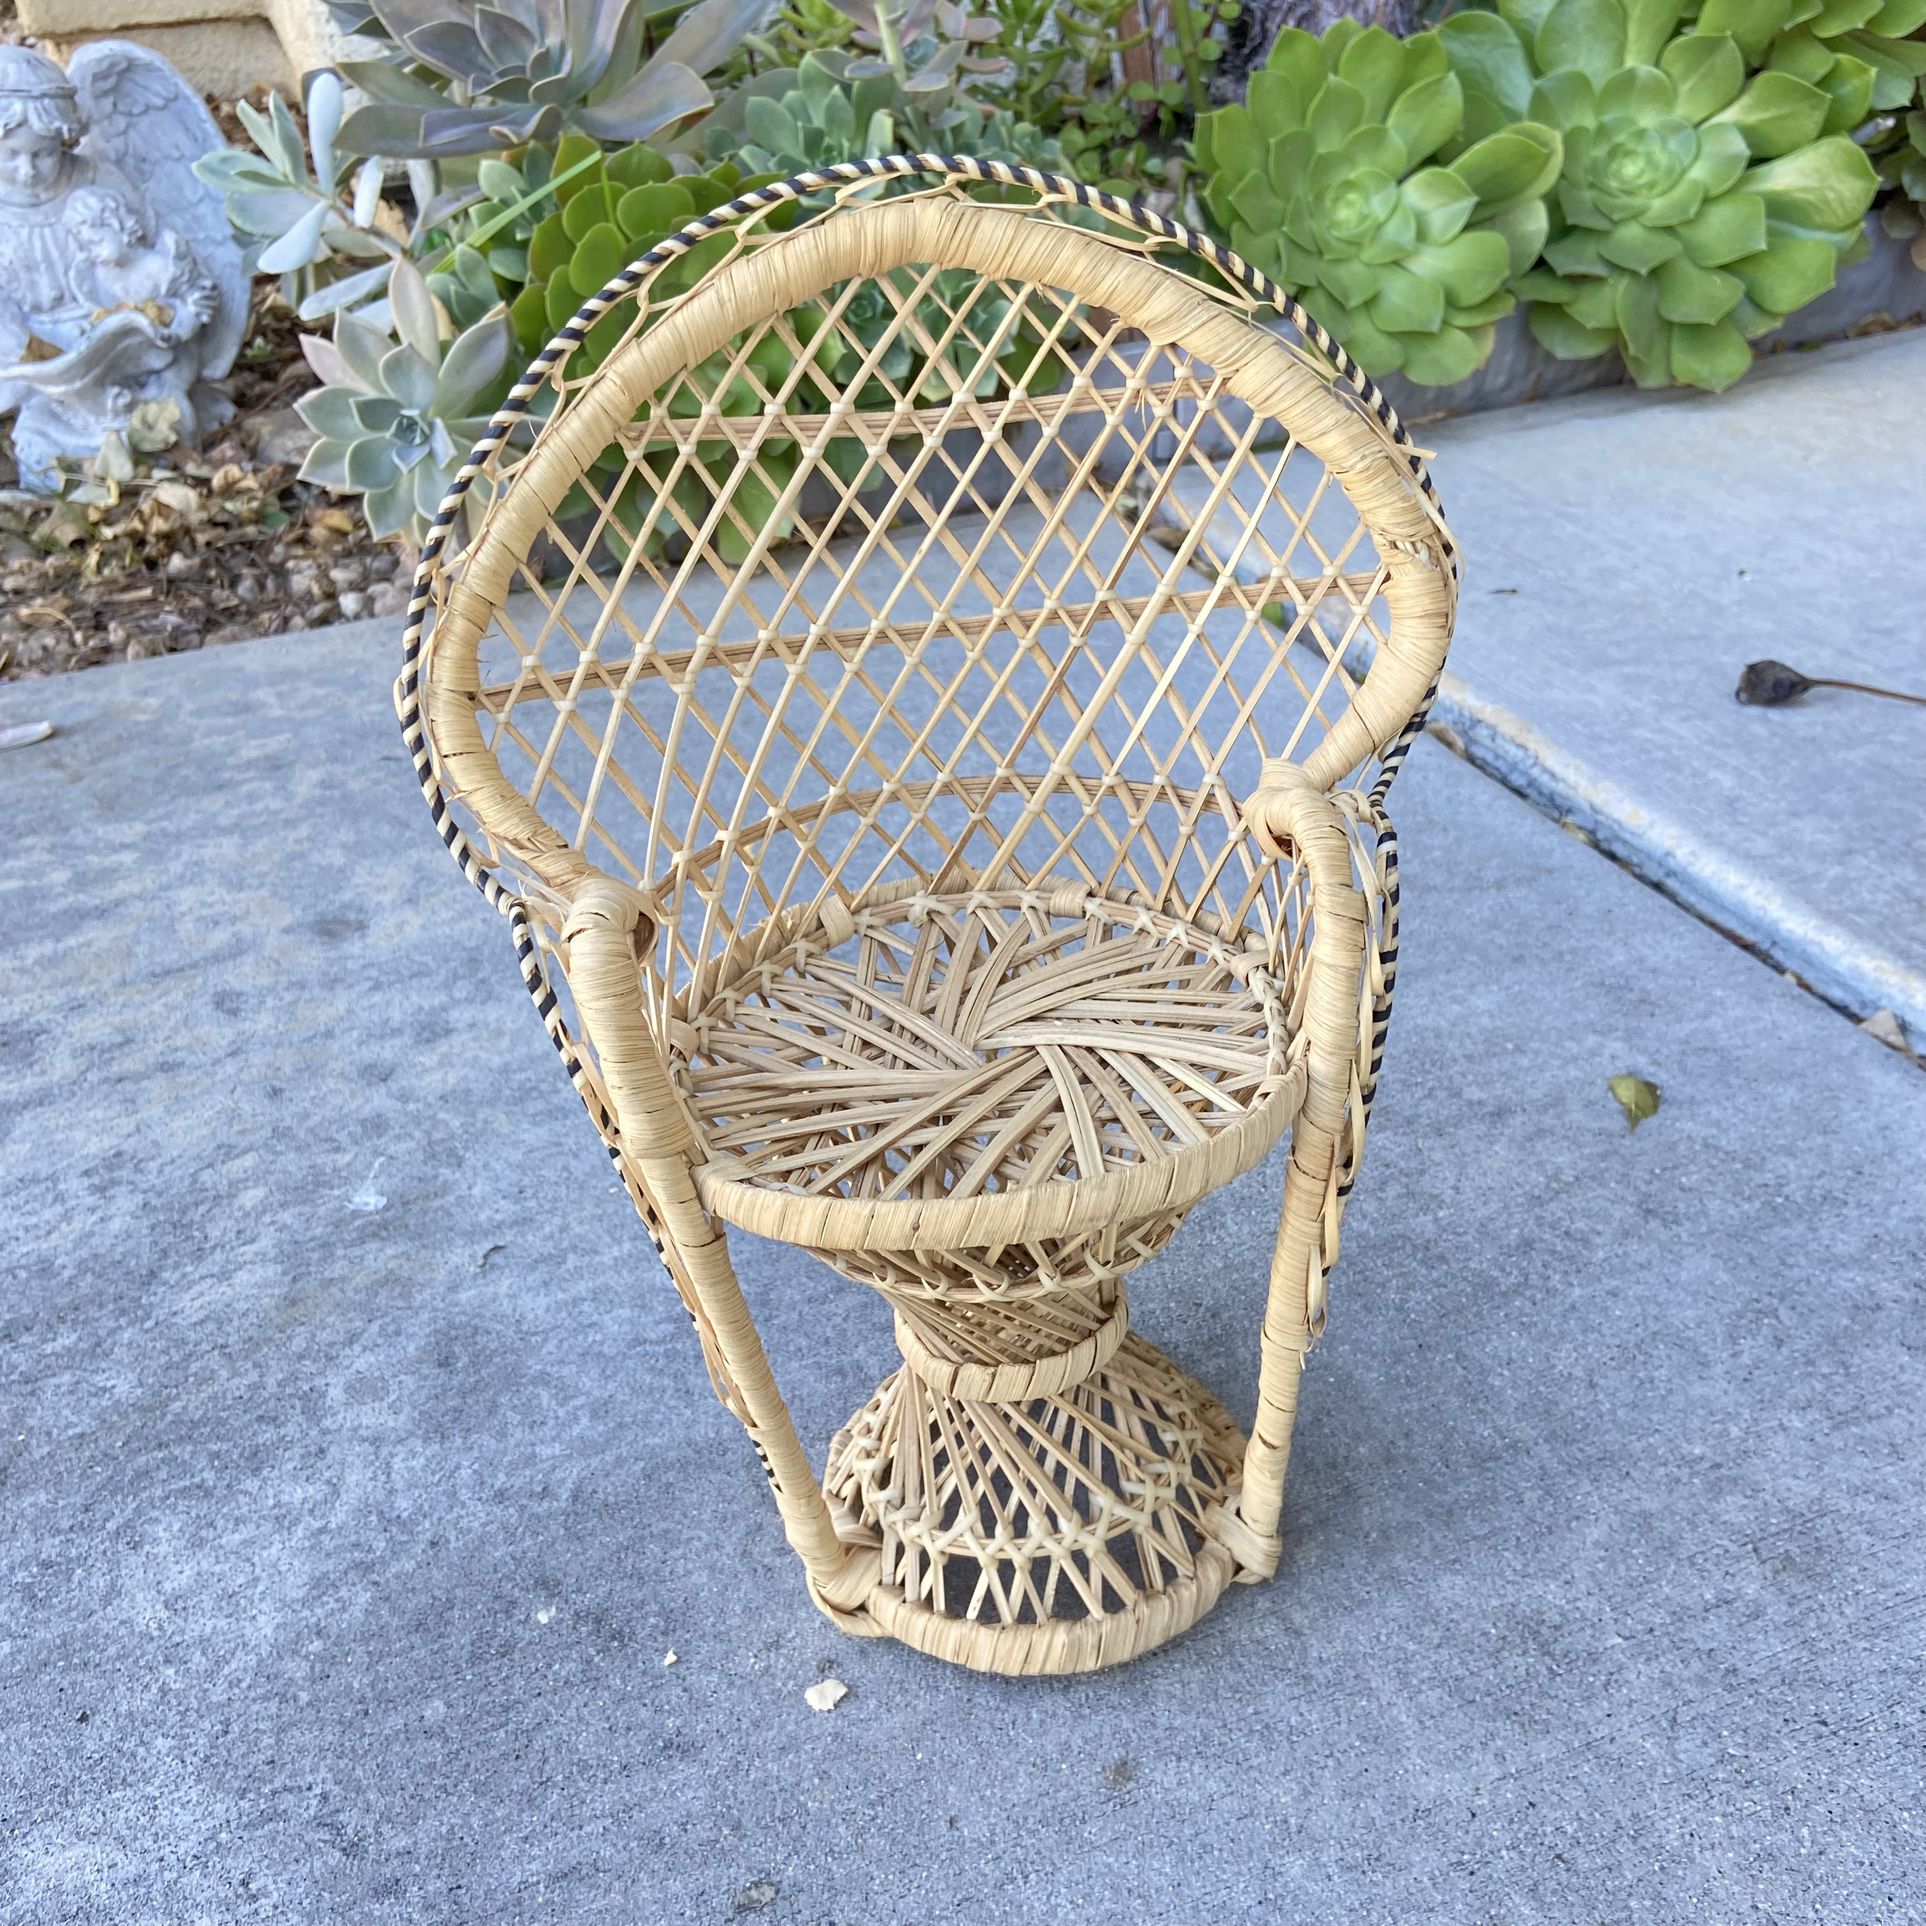 Not An Actual Chair! Small 11.5” Peacock Fan Back Chair Wicker Plant Holder